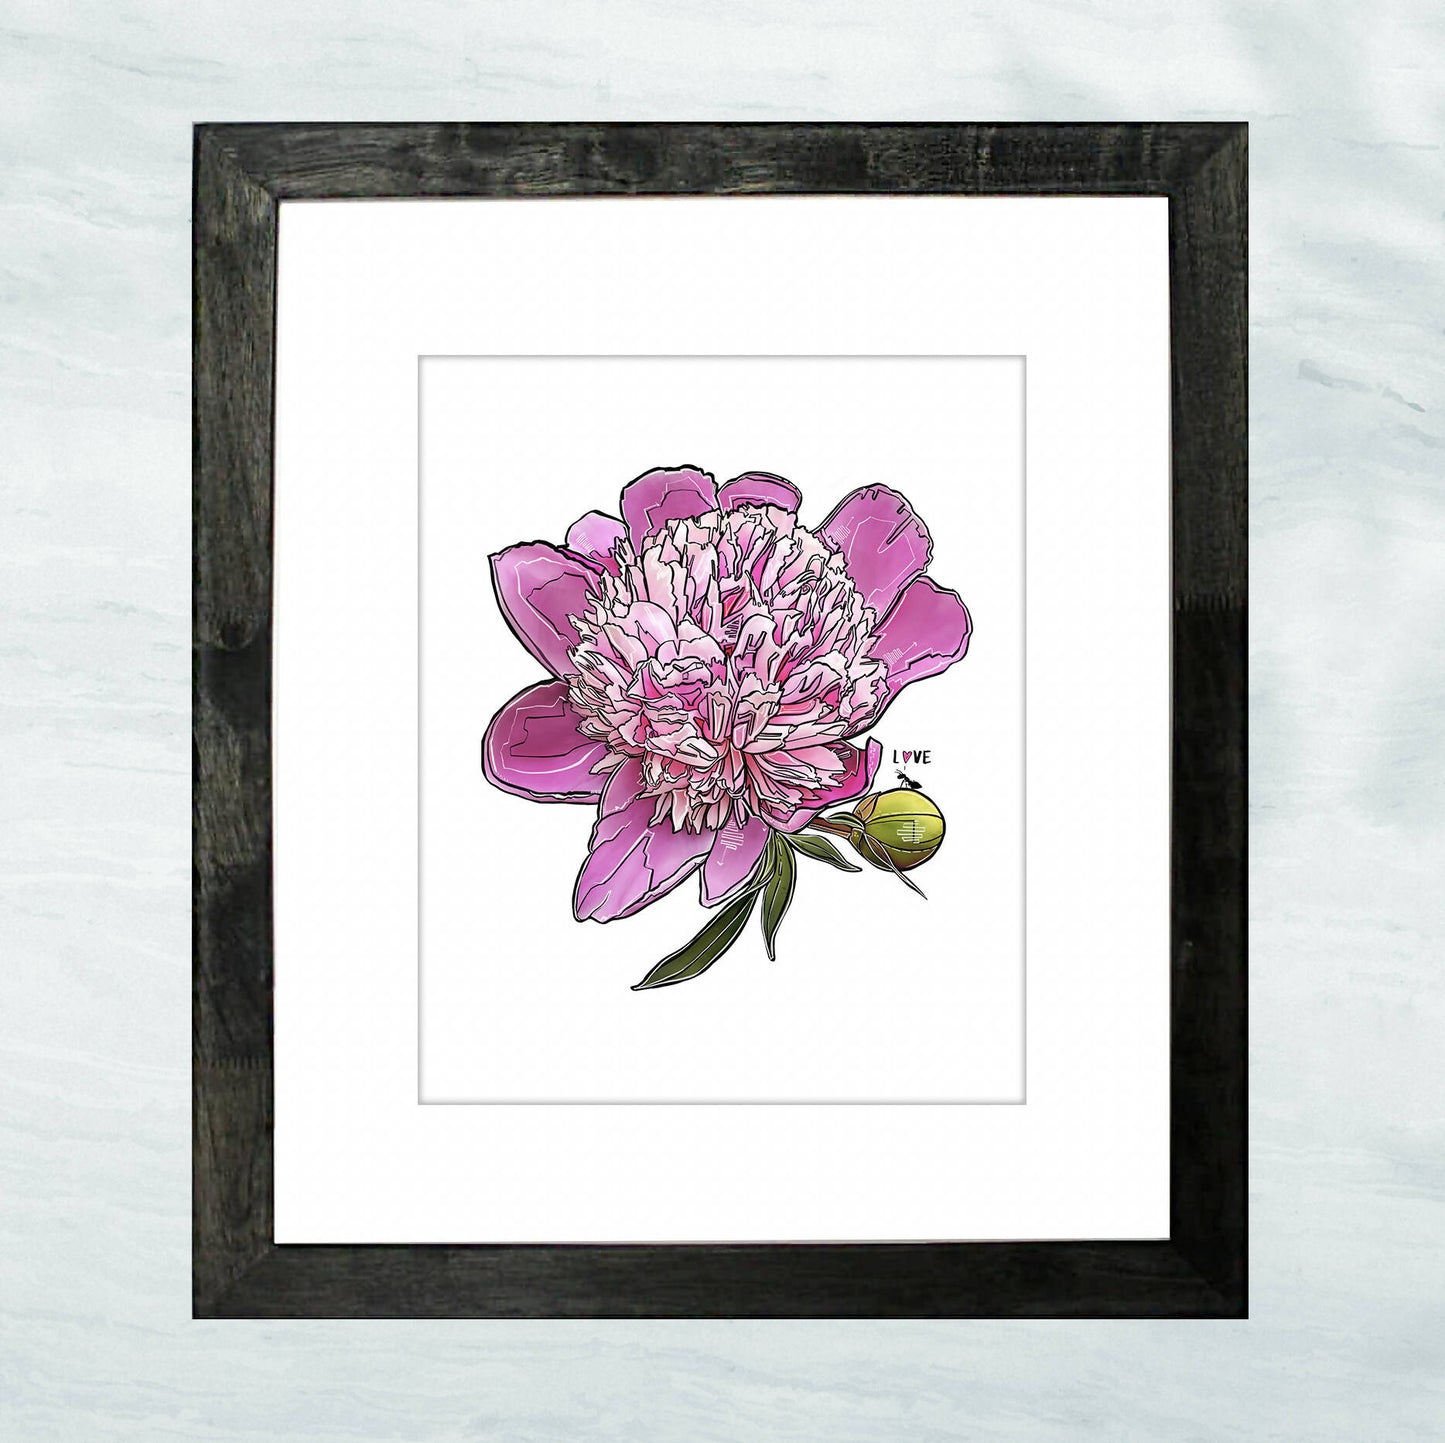 "Admiration" Lustre Print with Linen Texture, Framed